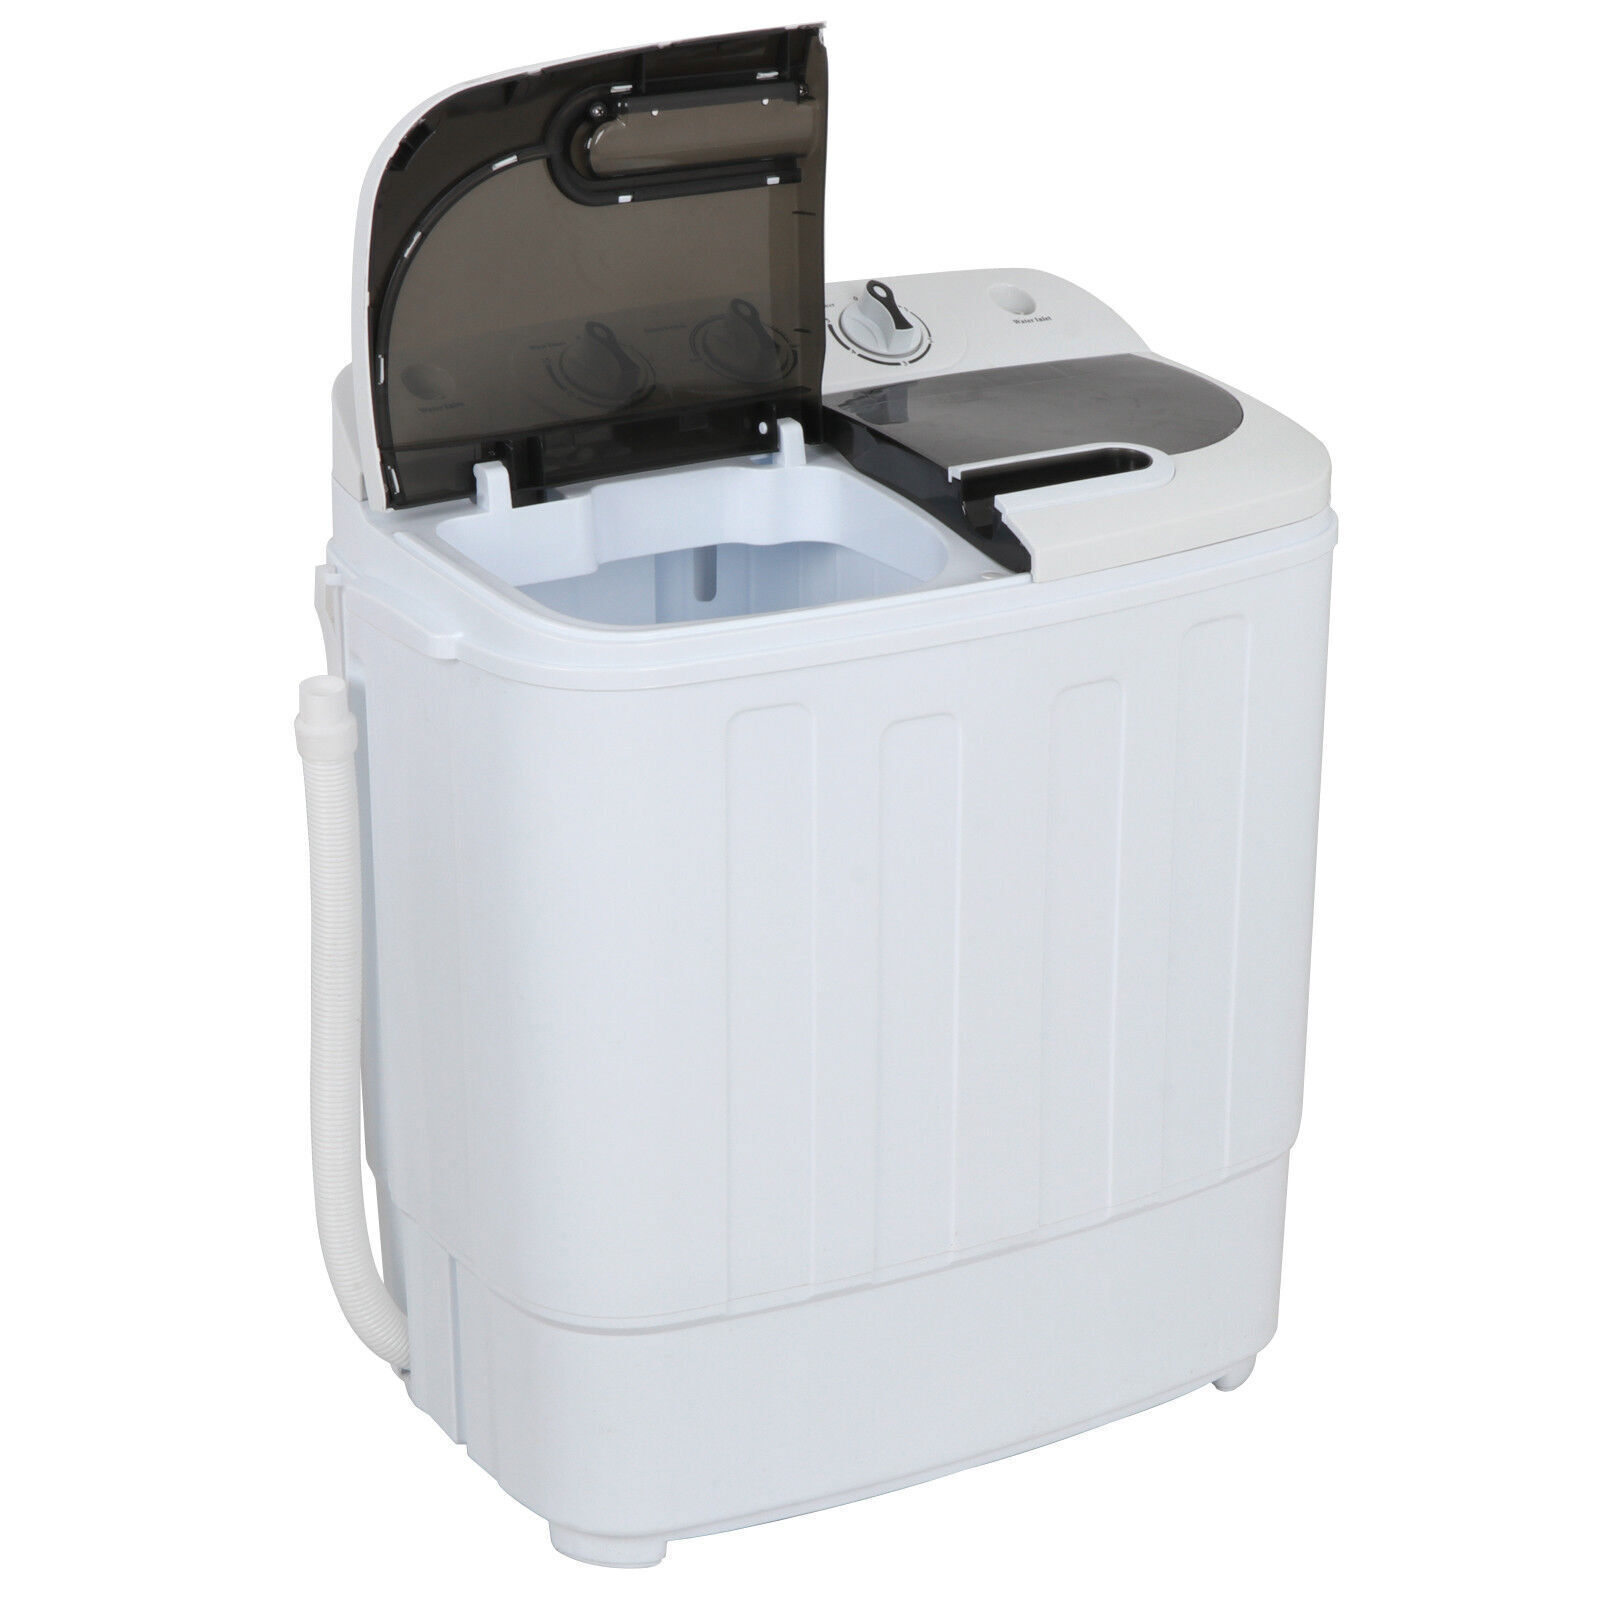 Great Choice Products Mini Wash Machine Compact Twin Tub 13Lbs Top Load Washer Spin Dryer Portable